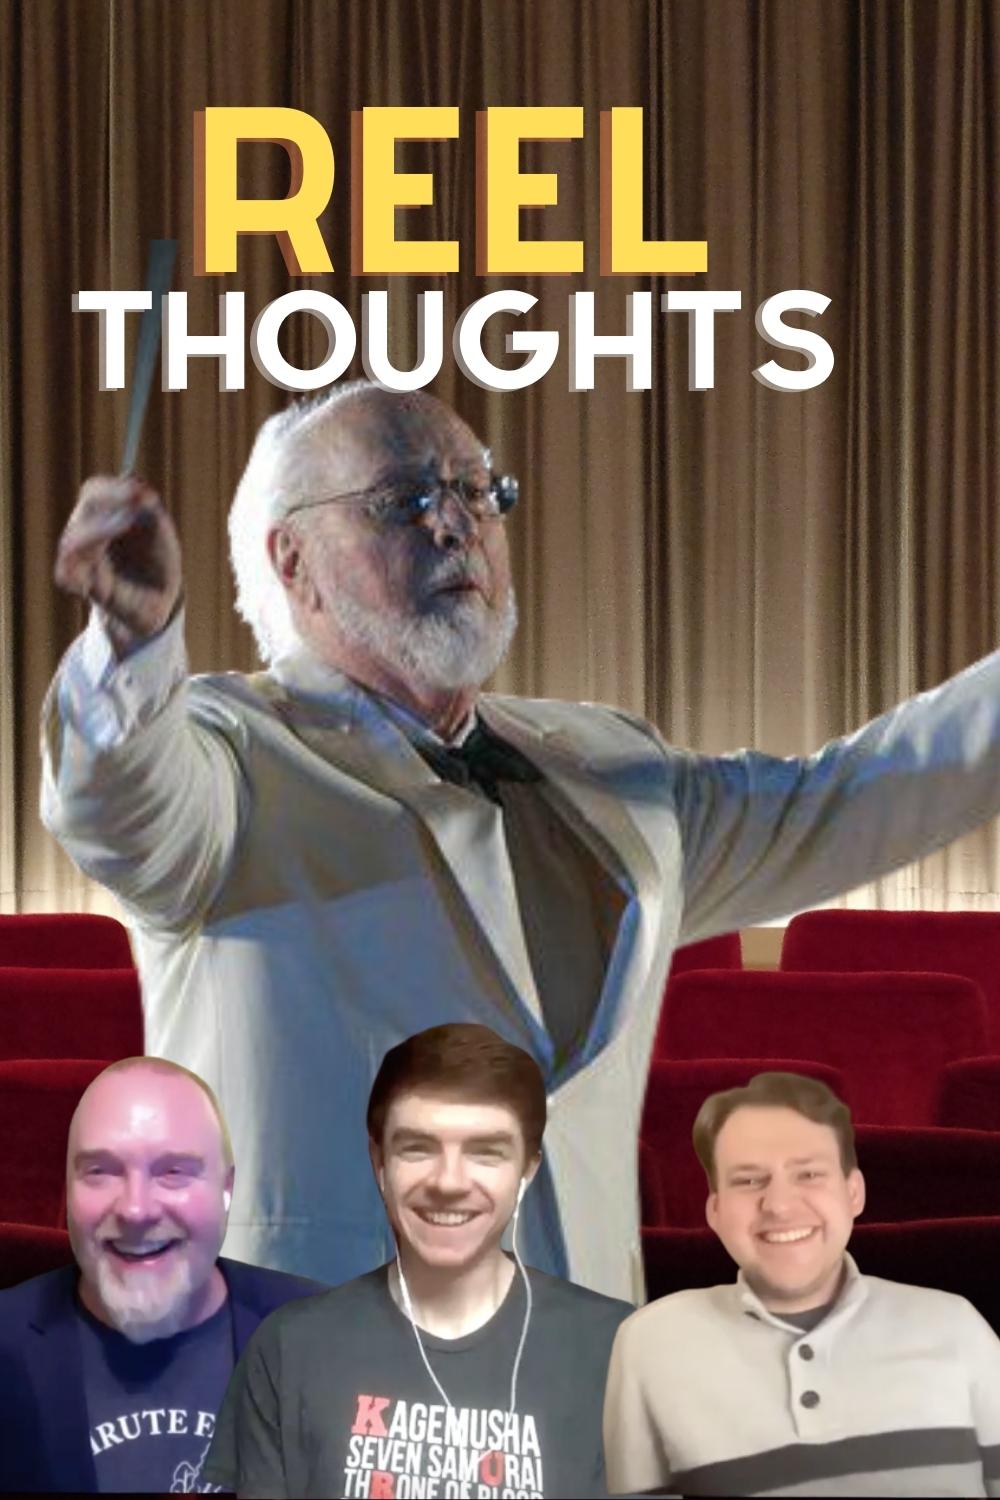 Reel Thoughts explores the Legendary John Williams